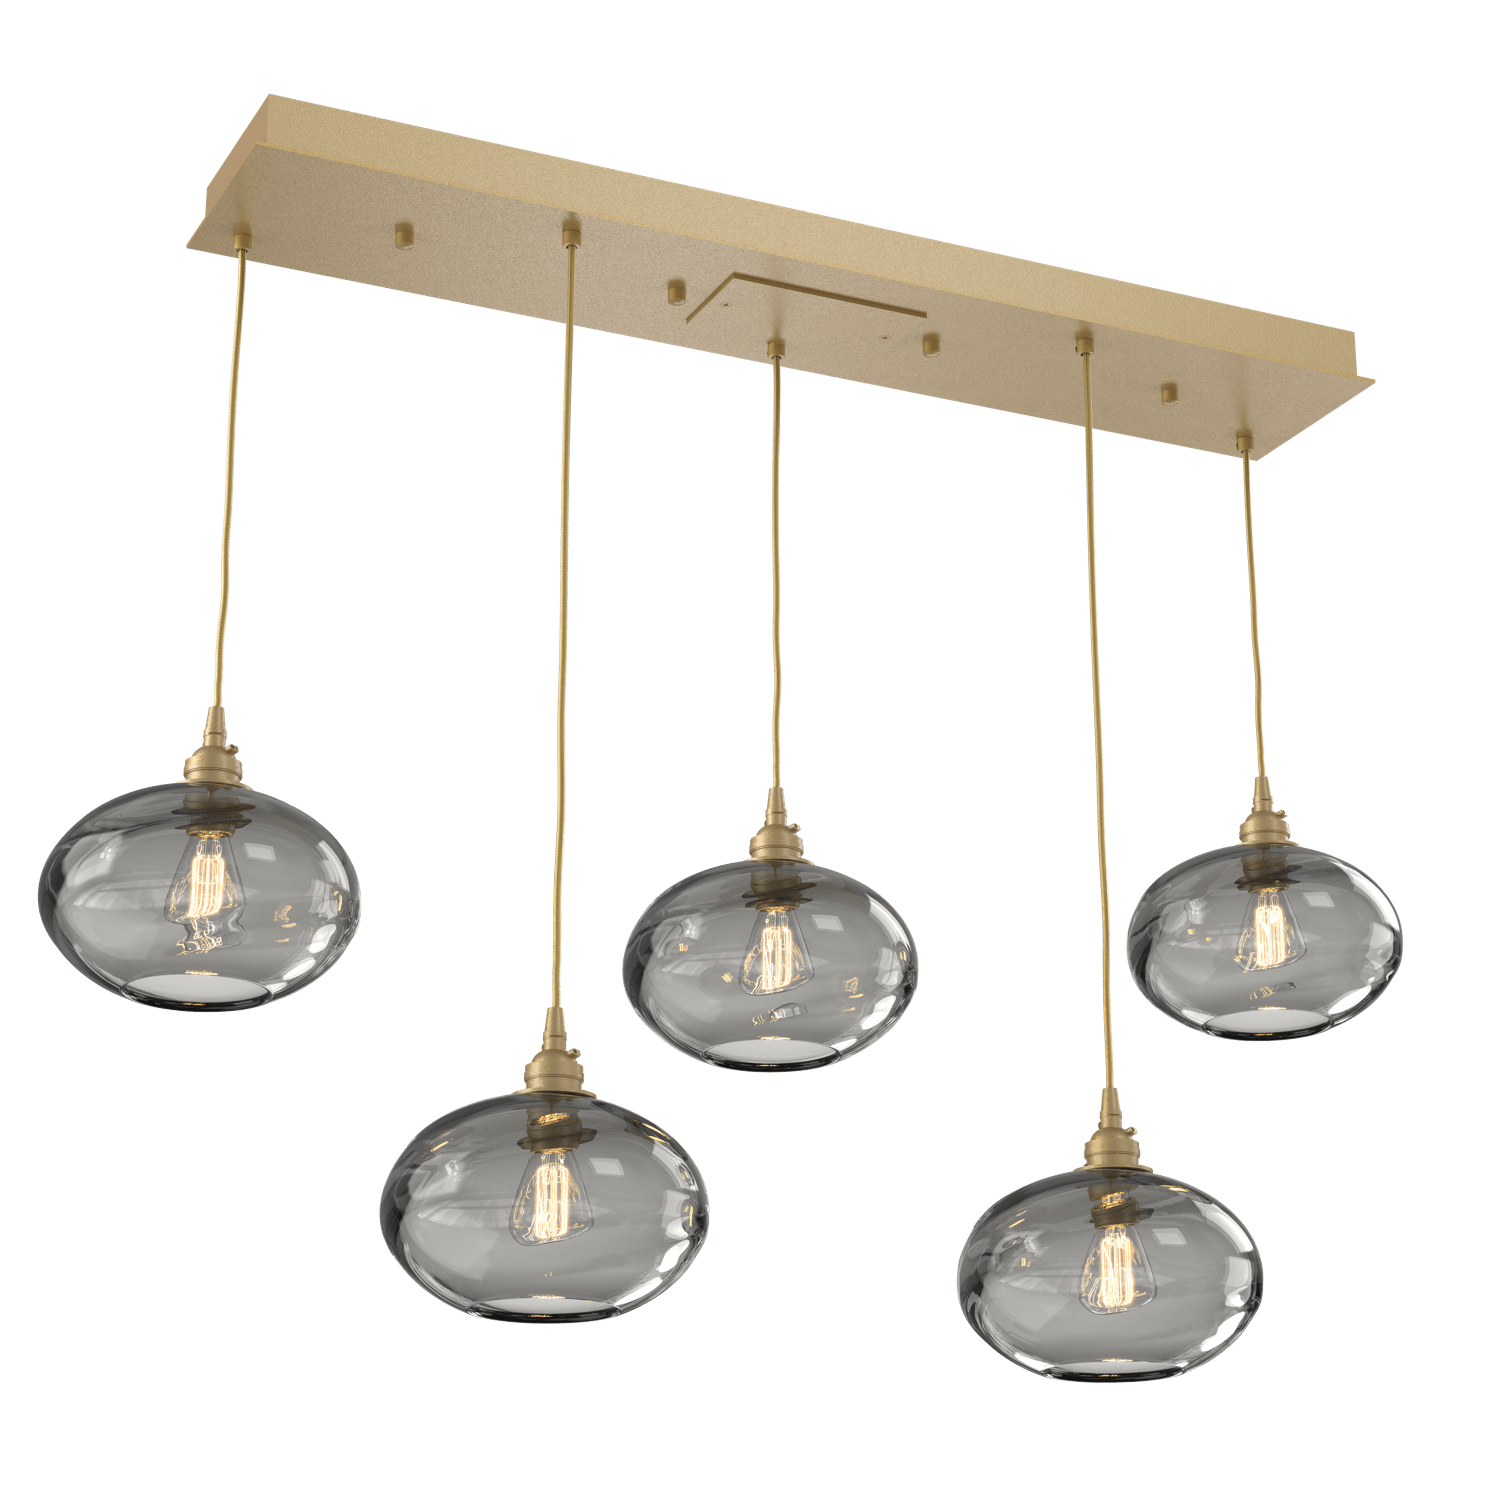 PLB0036-05-GB-OS-Hammerton-Studio-Optic-Blown-Glass-Coppa-5-light-linear-pendant-chandelier-with-gilded-brass-finish-and-optic-smoke-blown-glass-shades-and-incandescent-lamping